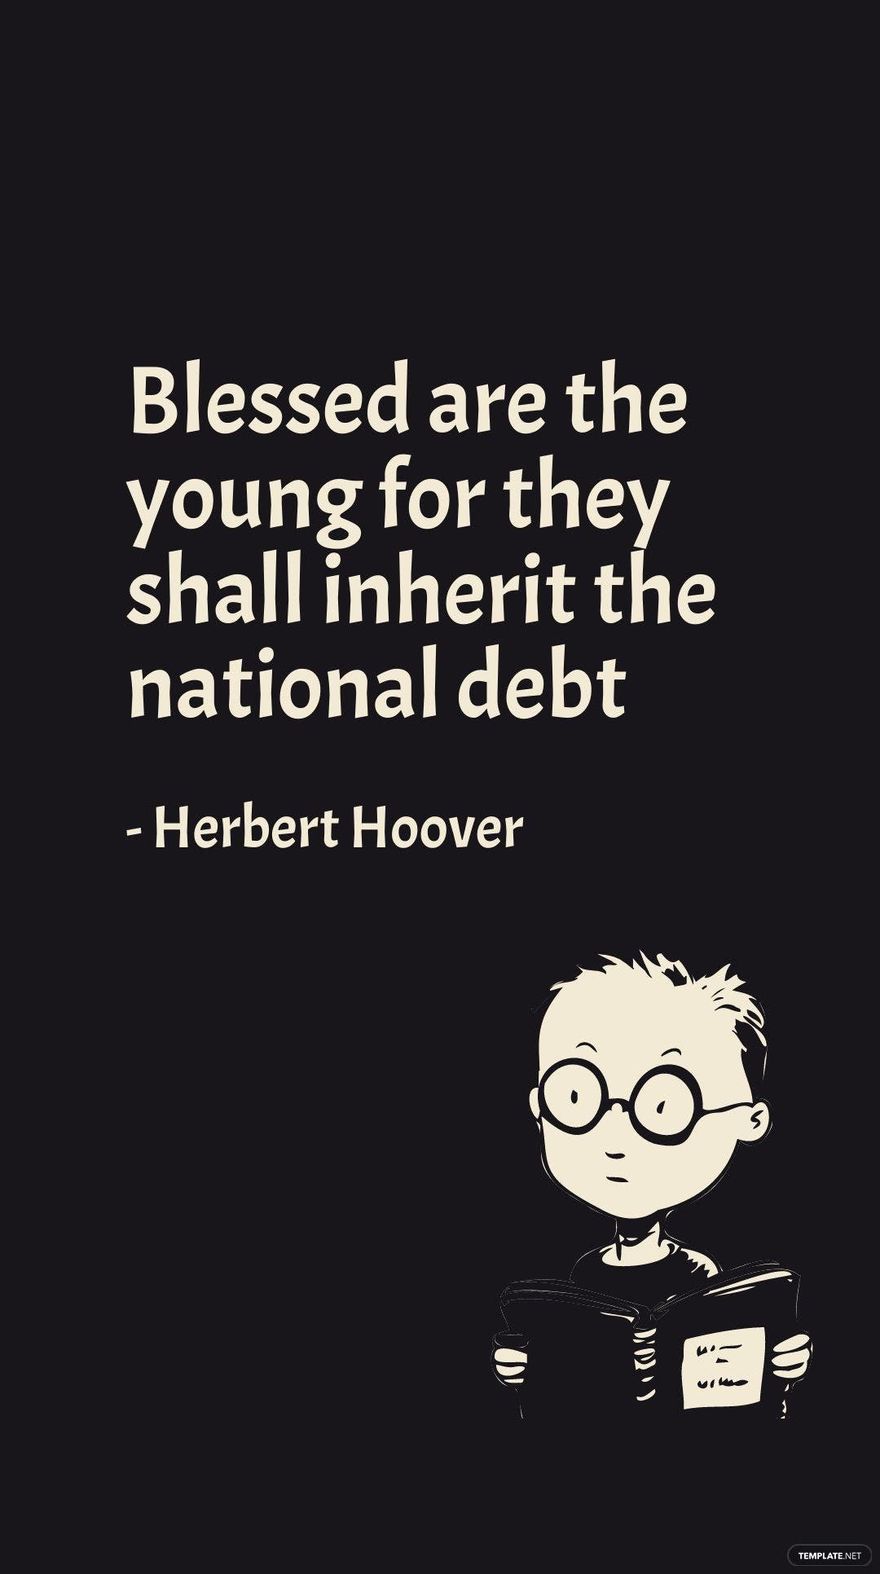 Herbert Hoover - Blessed are the young for they shall inherit the national debt